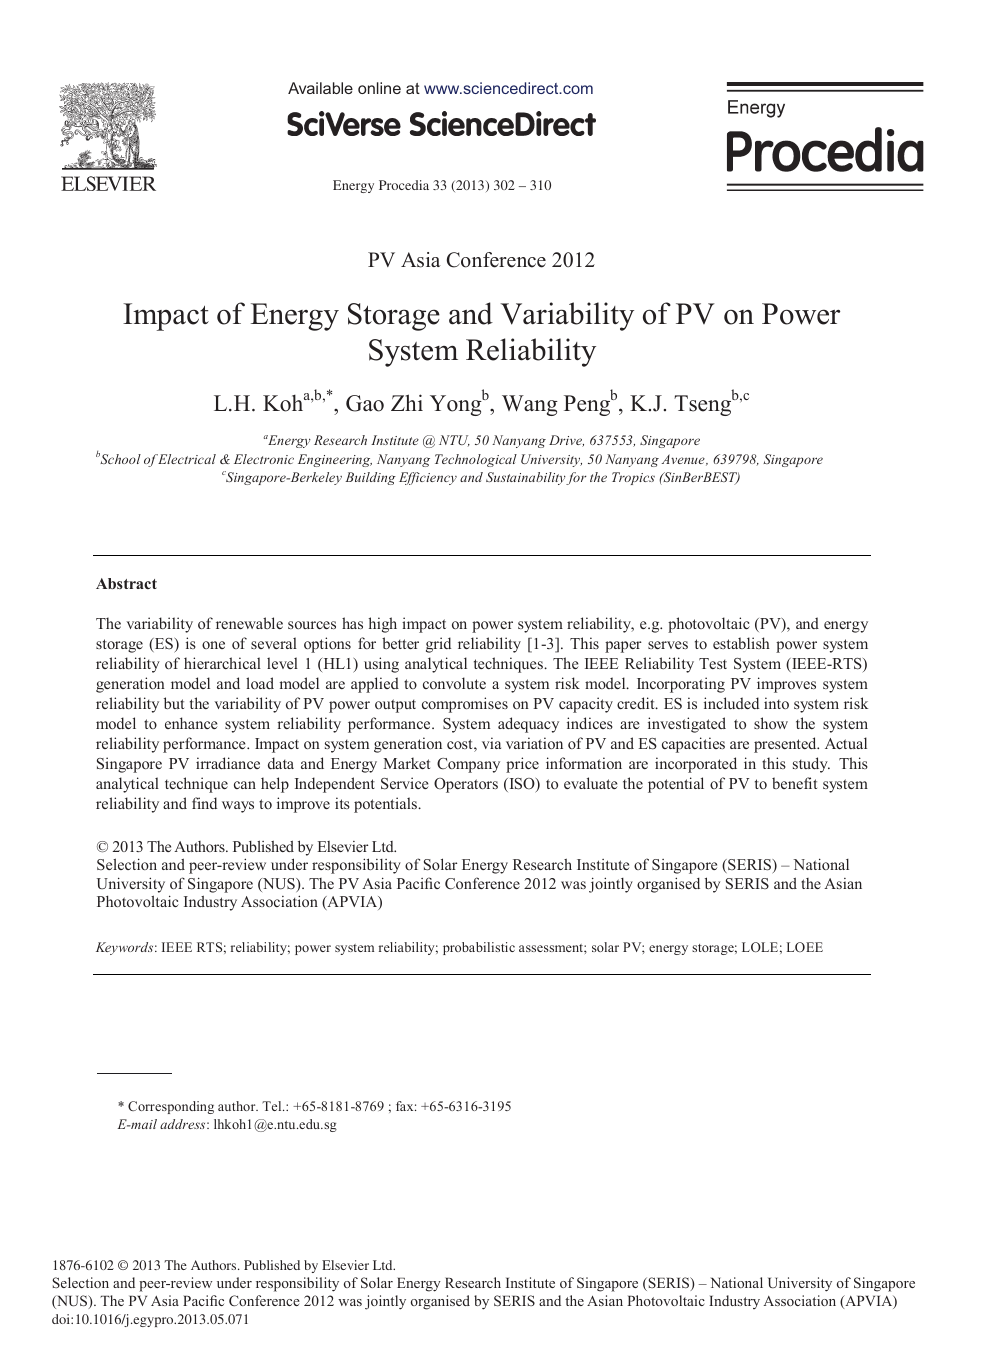 Impact Of Energy Storage And Variability Of Pv On Power System Reliability Topic Of Research Paper In Electrical Engineering Electronic Engineering Information Engineering Download Scholarly Article Pdf And Read For Free